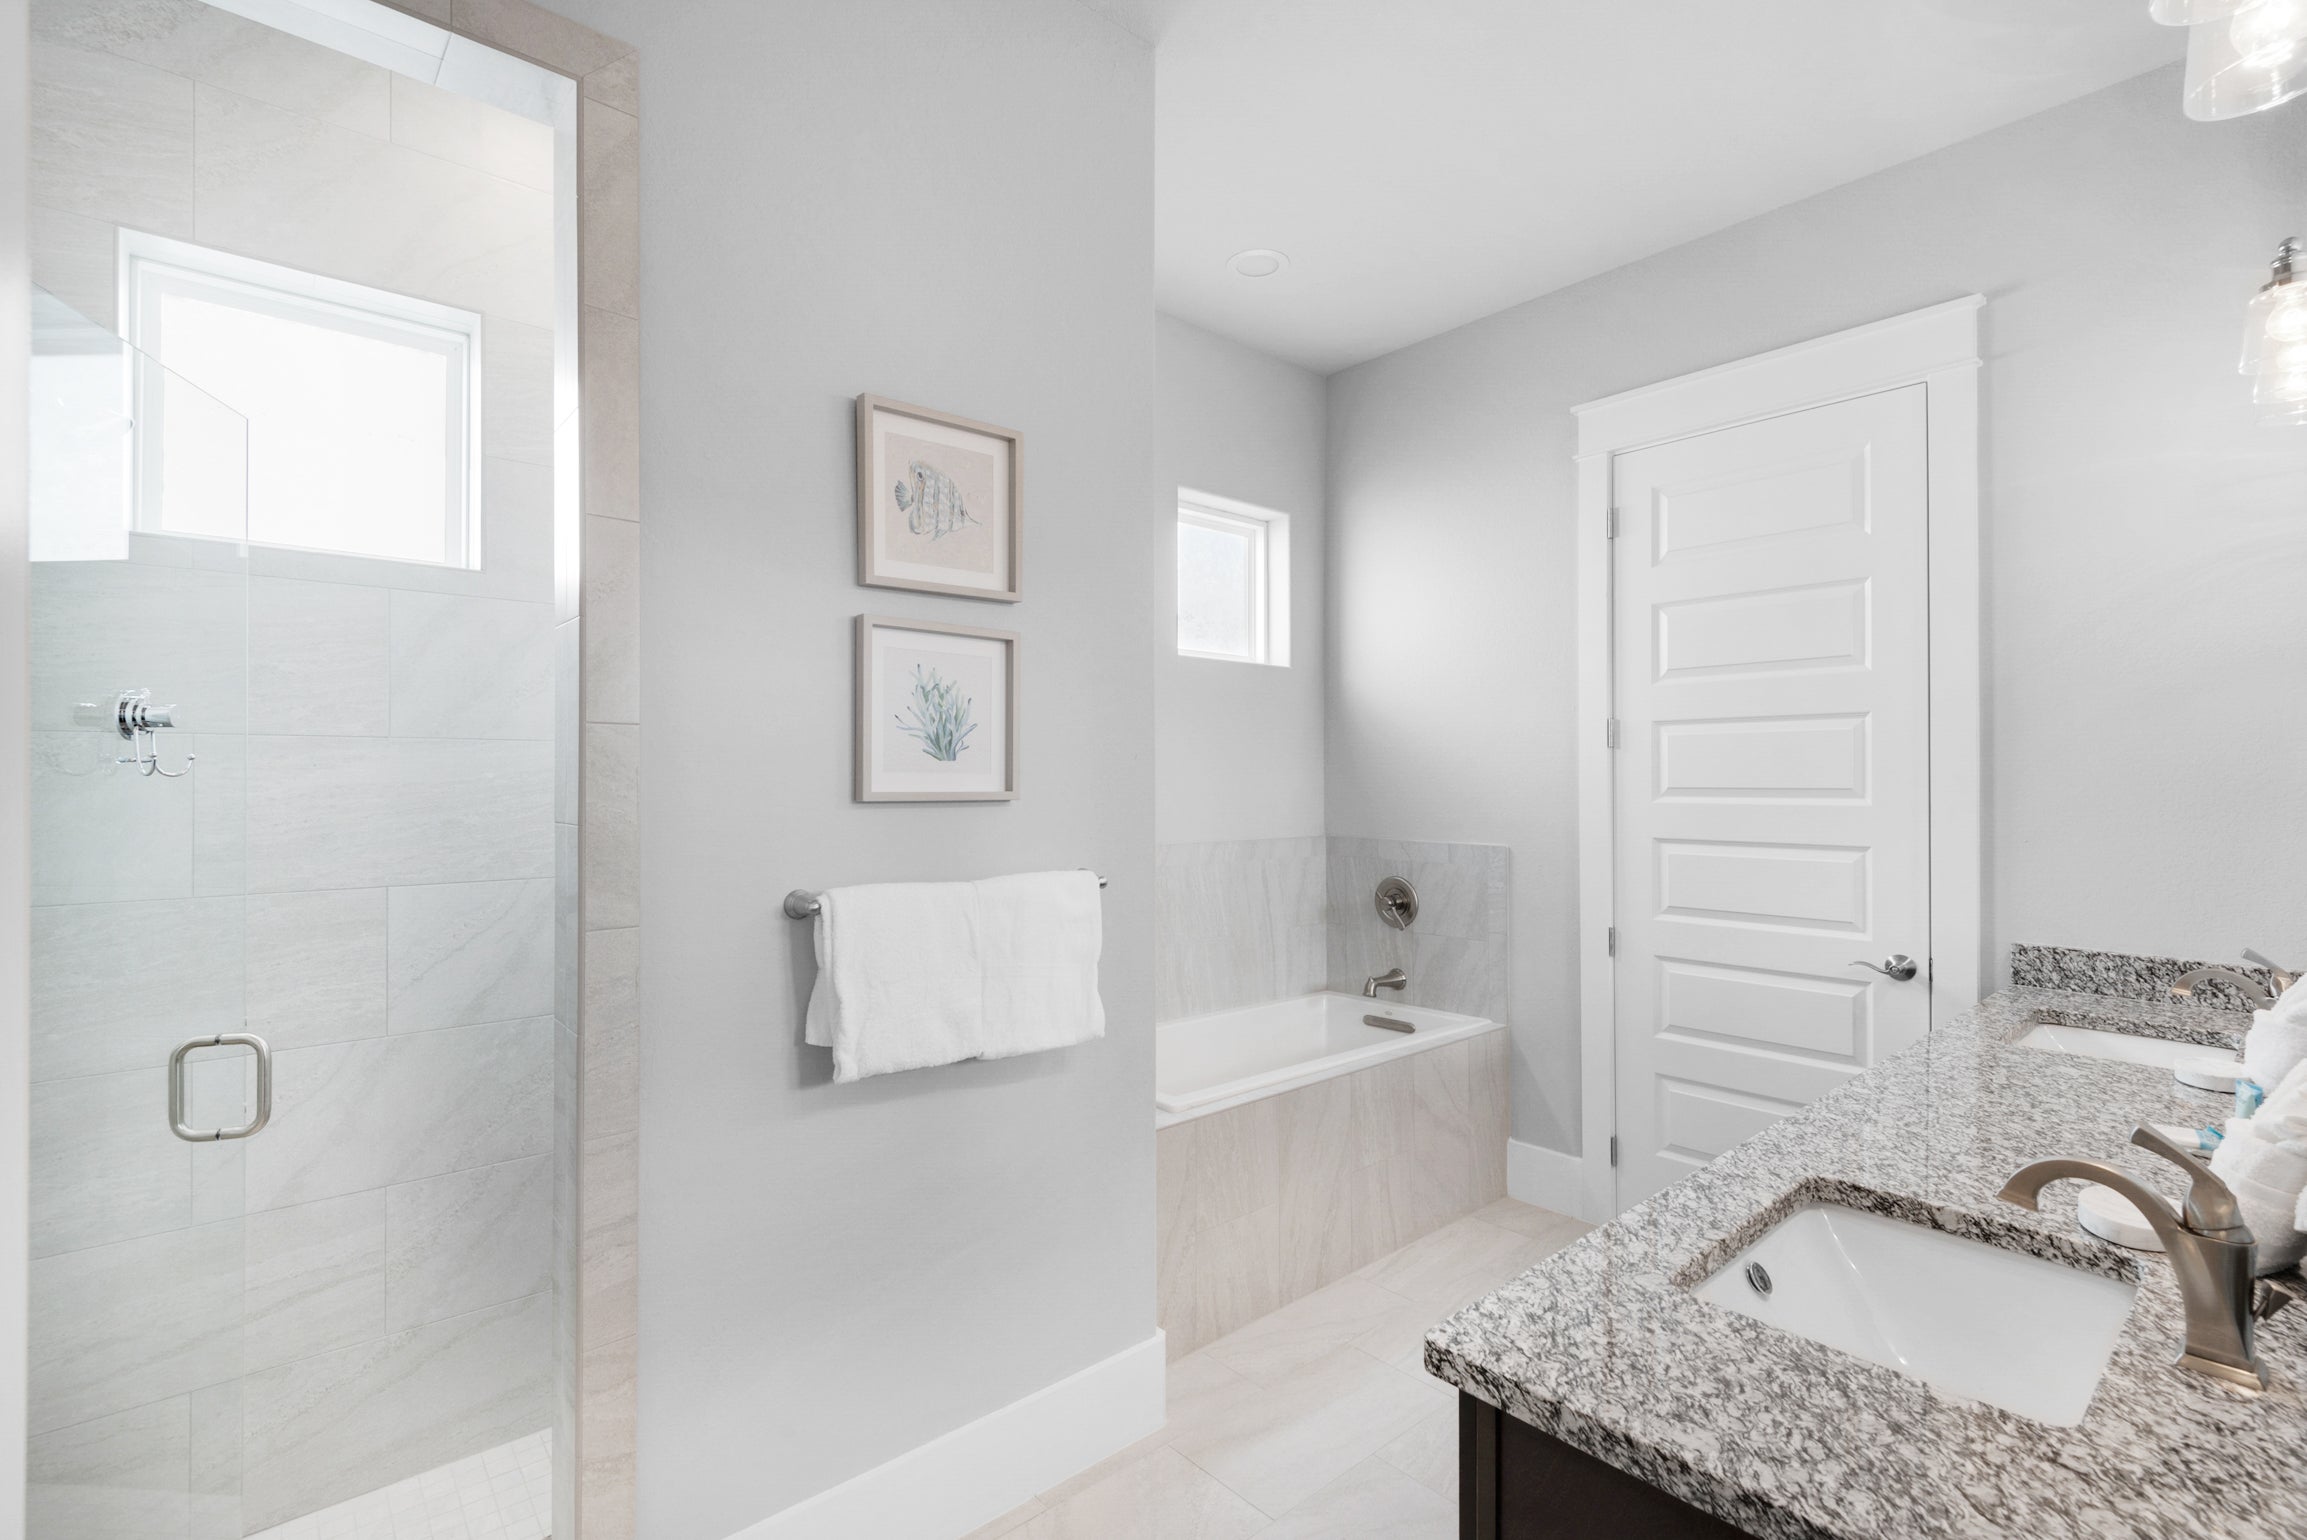 Master bathroom with full walk-in shower